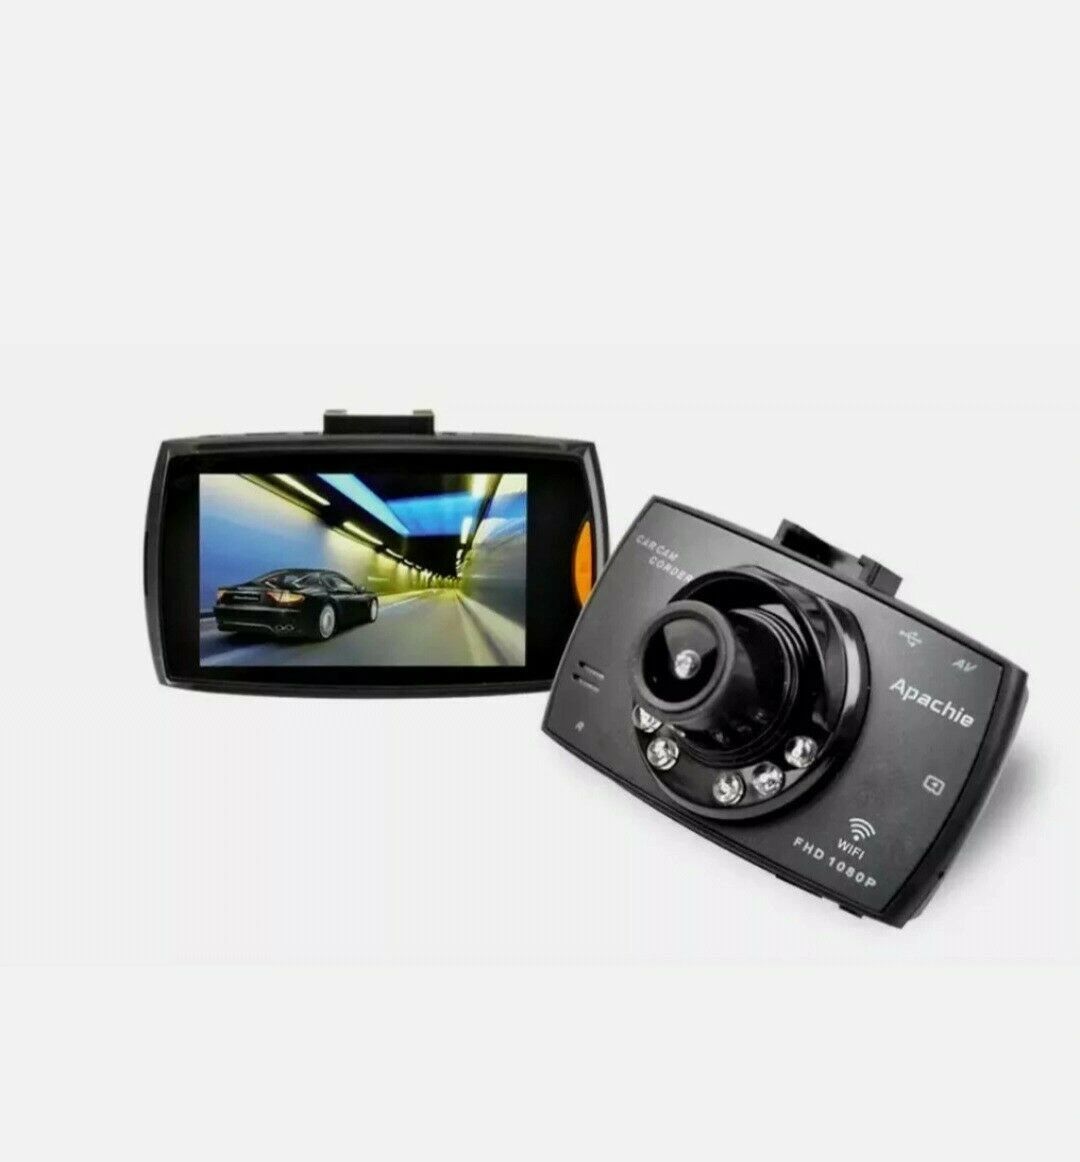 Apachie G100 Dual Dashboard Camera with WiFi front and rear Vision RRP  £49.99